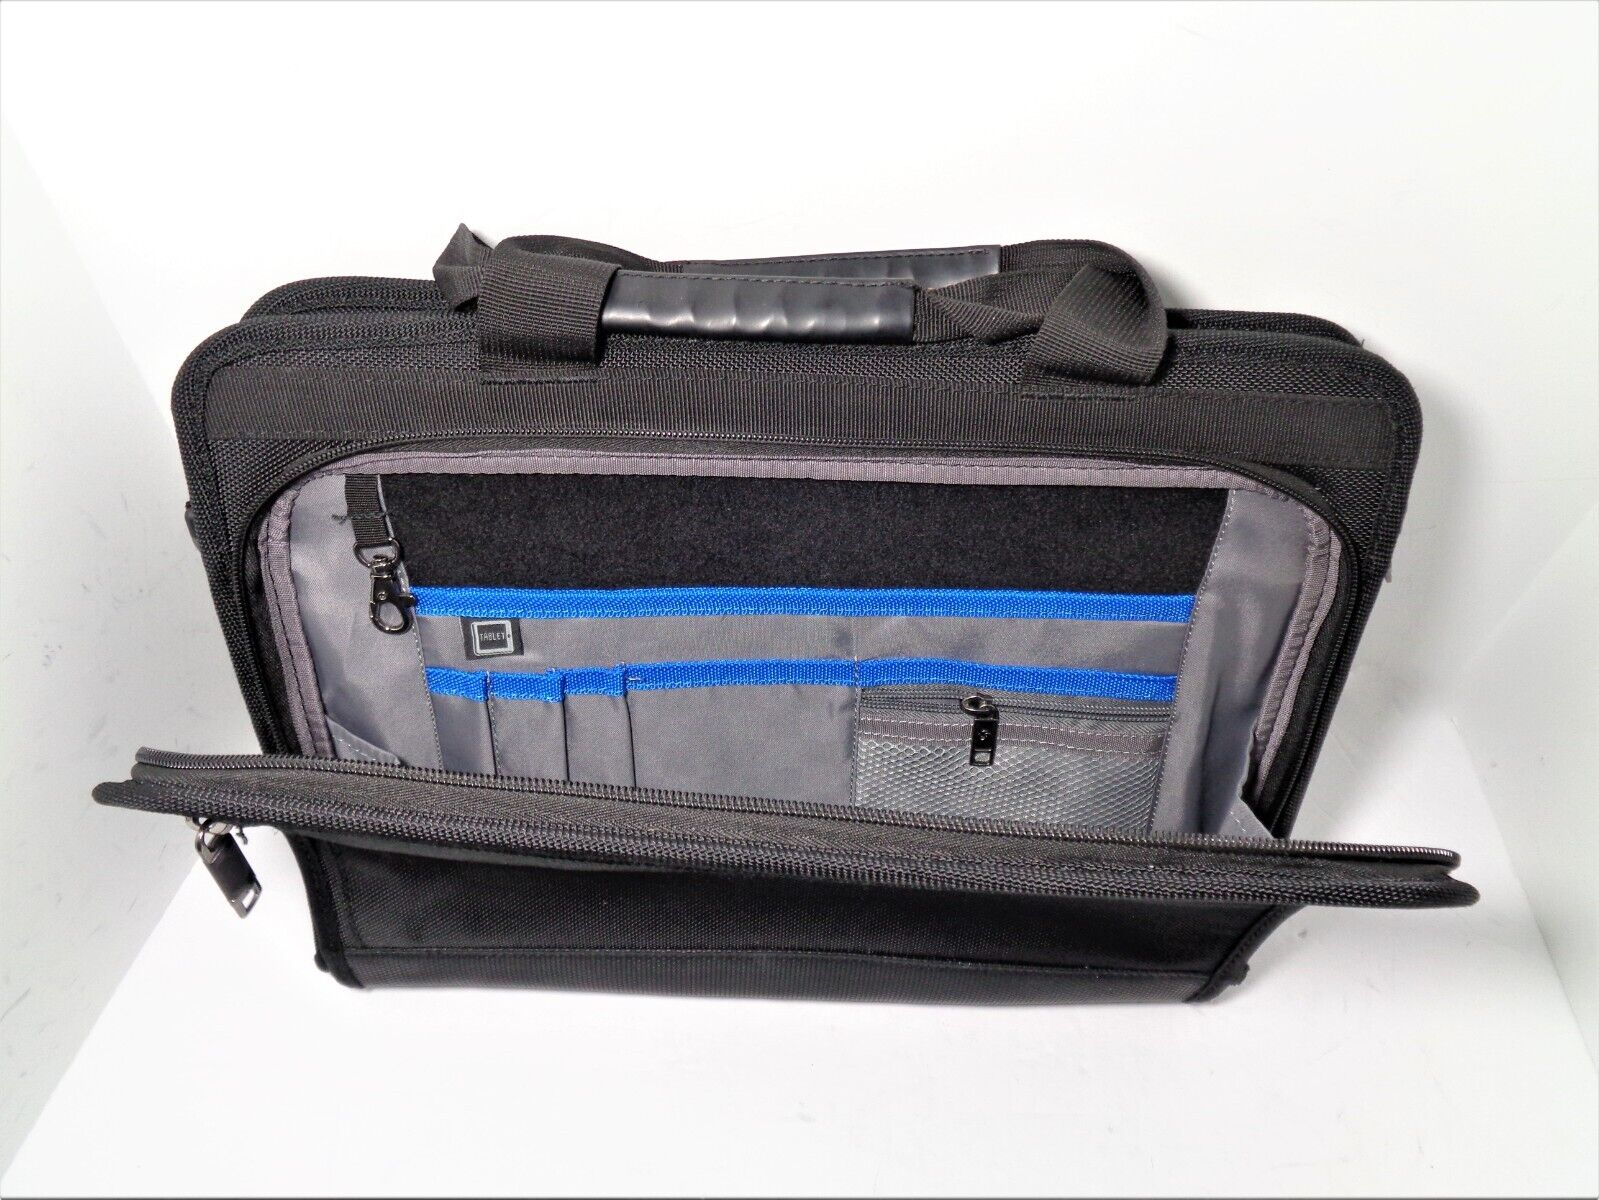 Samsonite Tablet/iPad Laptop/Armory Carry Case Bag Briefcase 11.5in X 15in X 3in